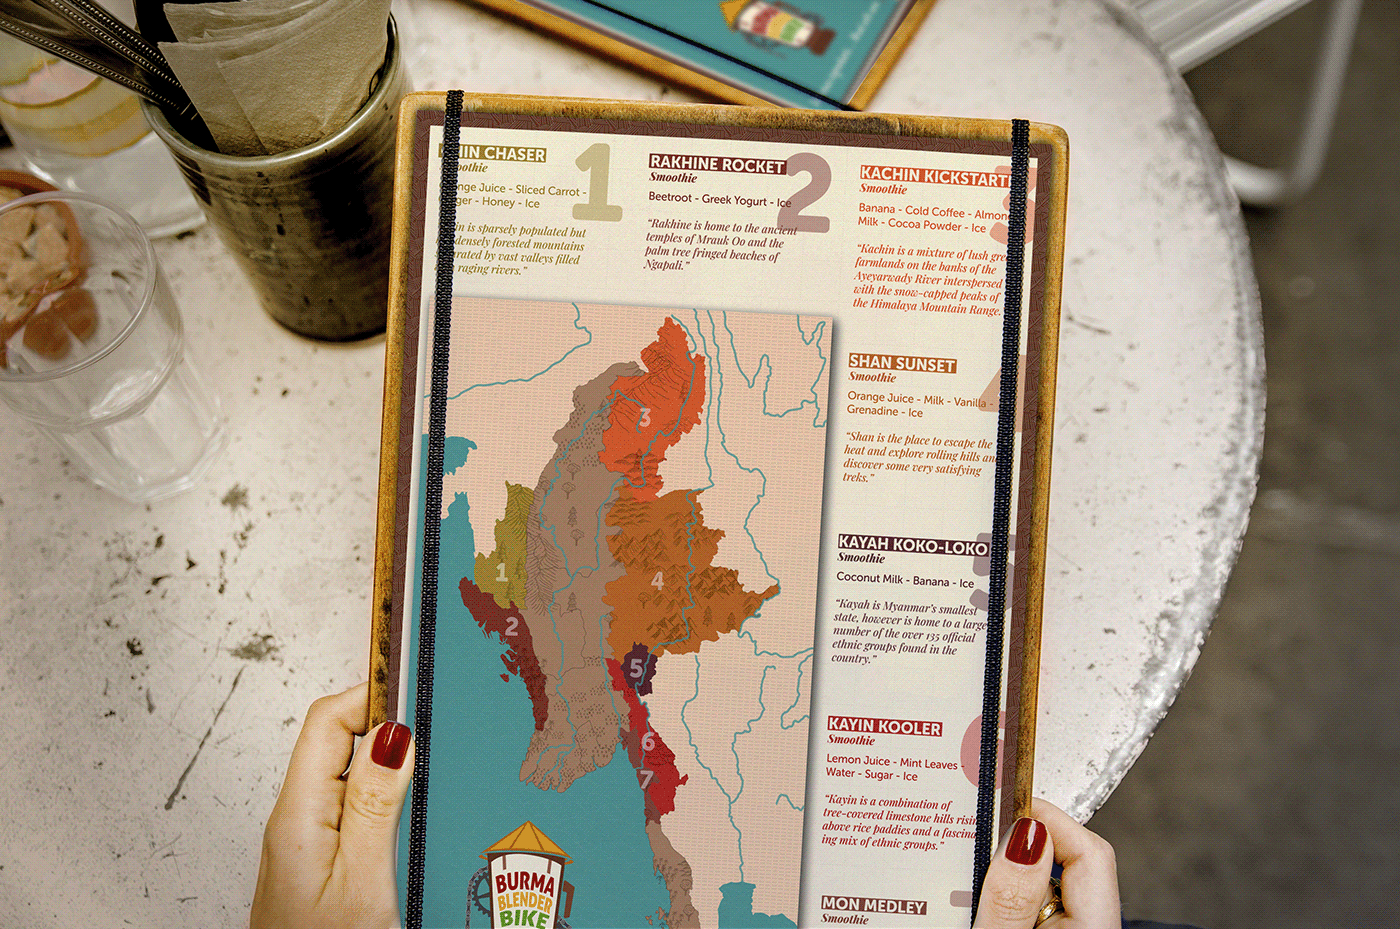 Map of States and Division of Myanmar on the menu